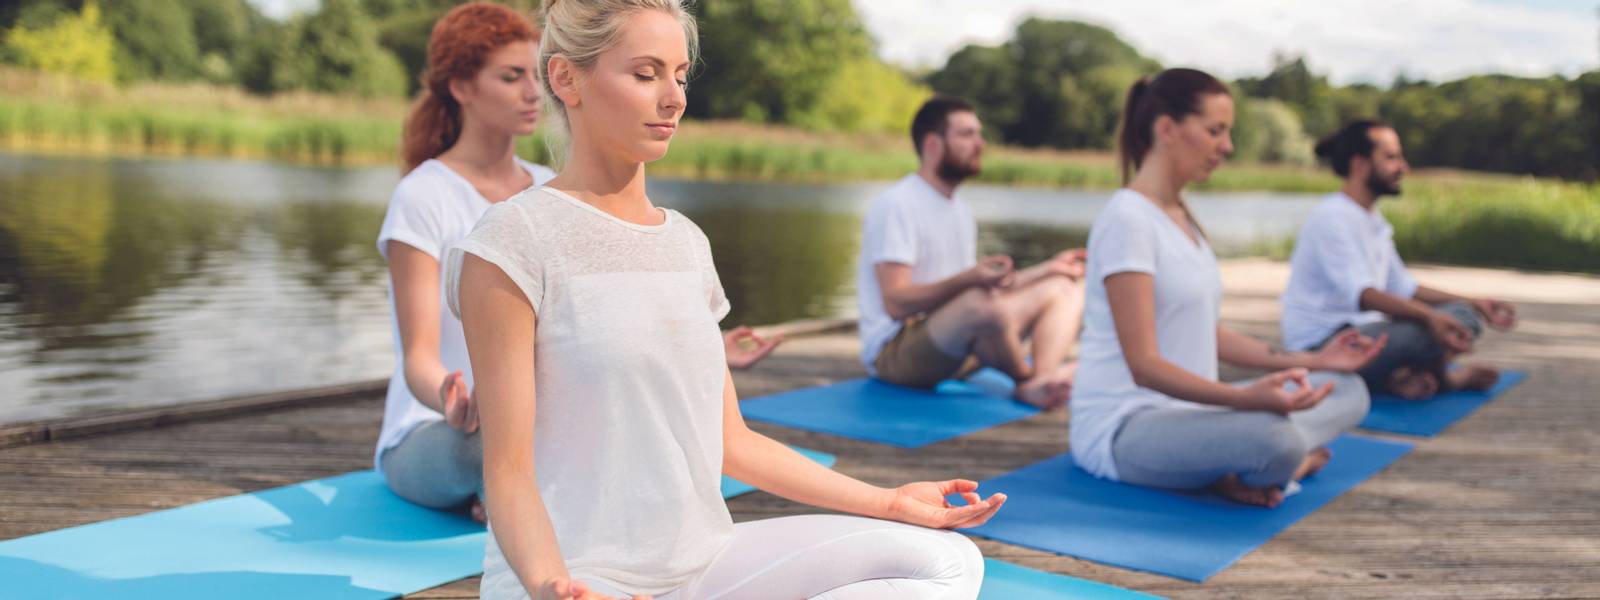 fitness, sport, yoga and healthy lifestyle concept - group of people meditating in lotus pose on river or lake berth